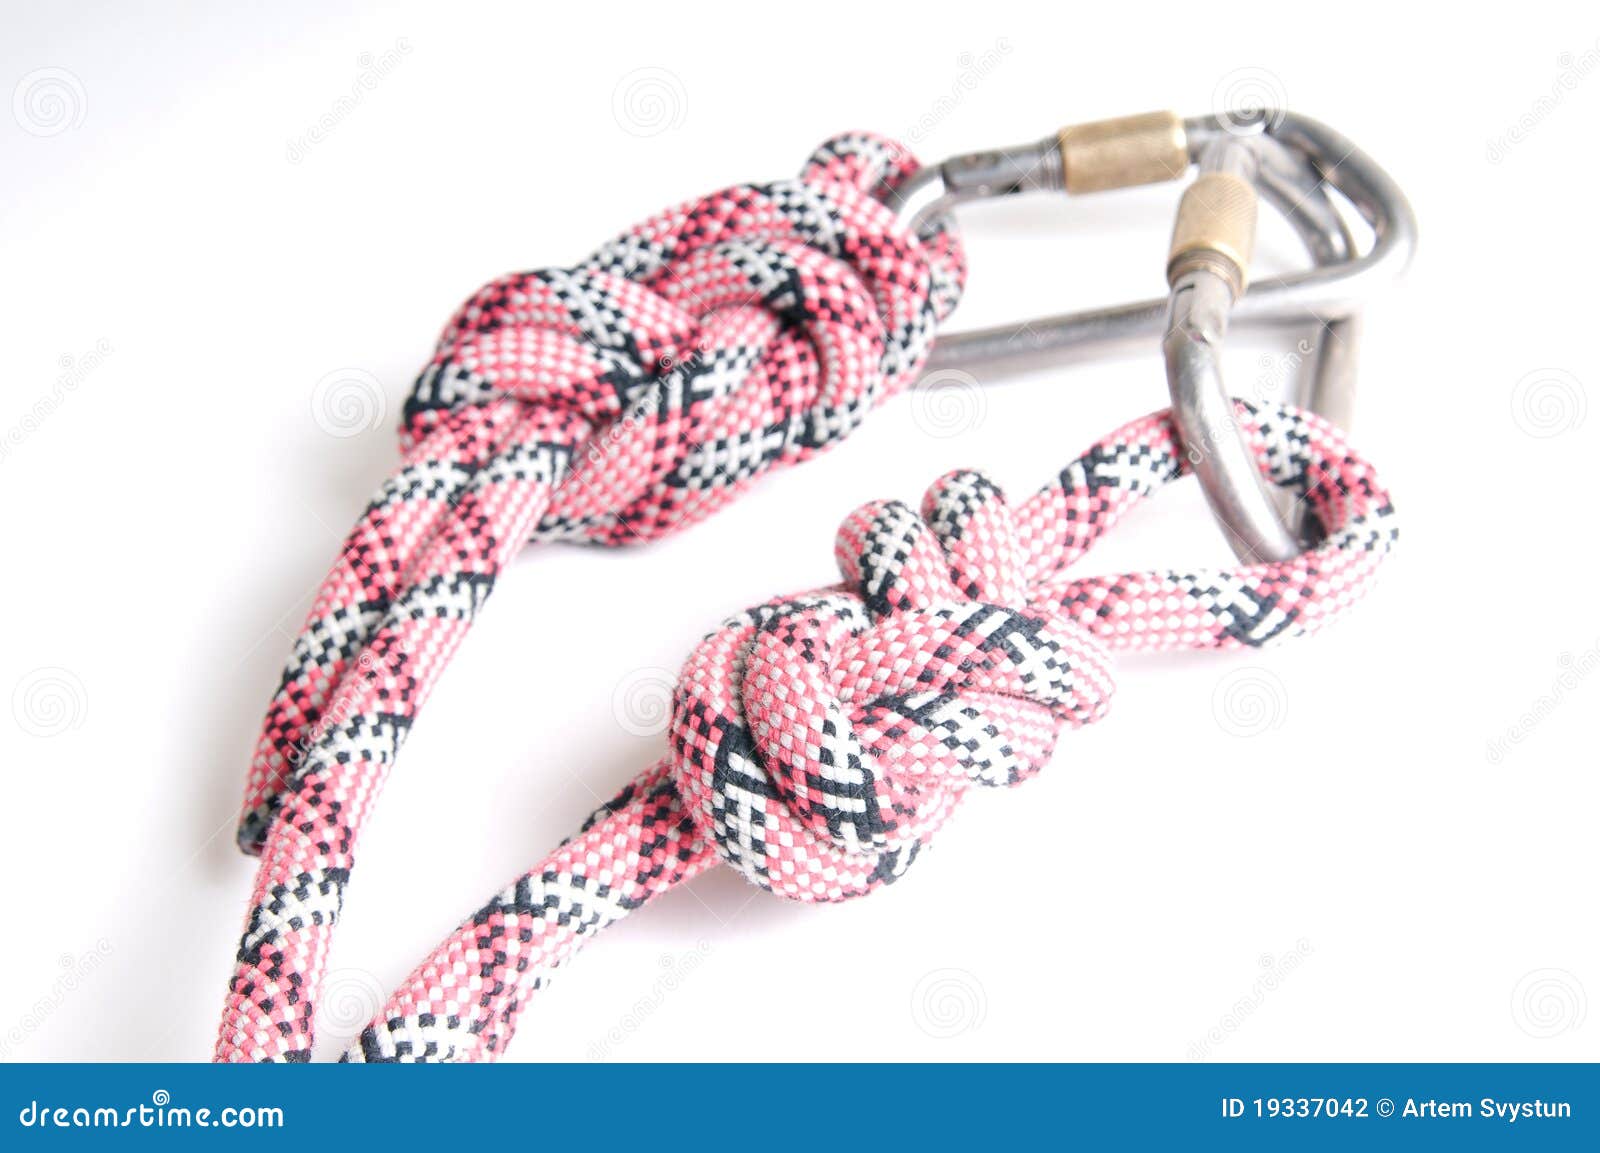 alpinist rope with carabine